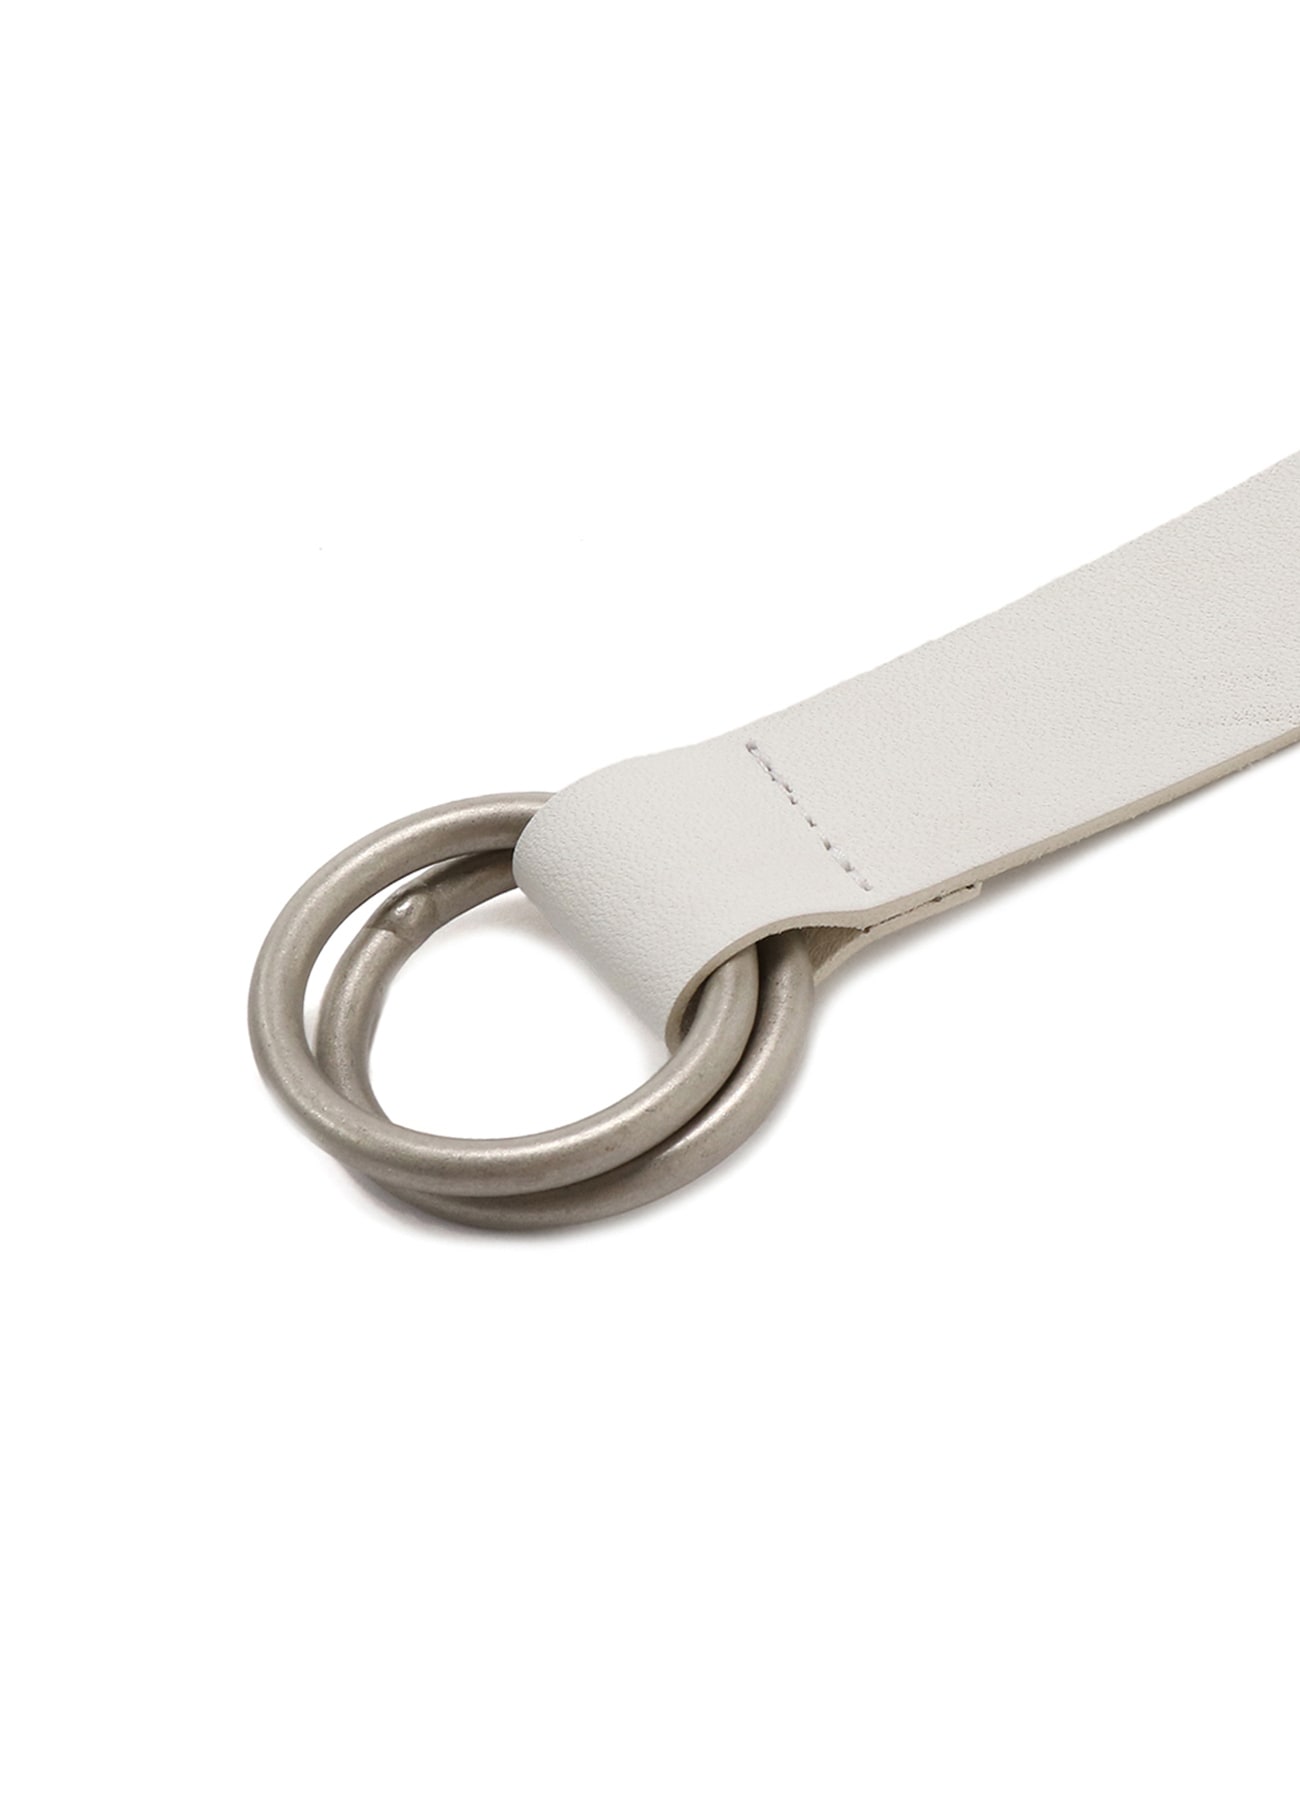 Cow Leather 25mm Long Ring Belt (FREE SIZE White): S'YTE ｜ THE 